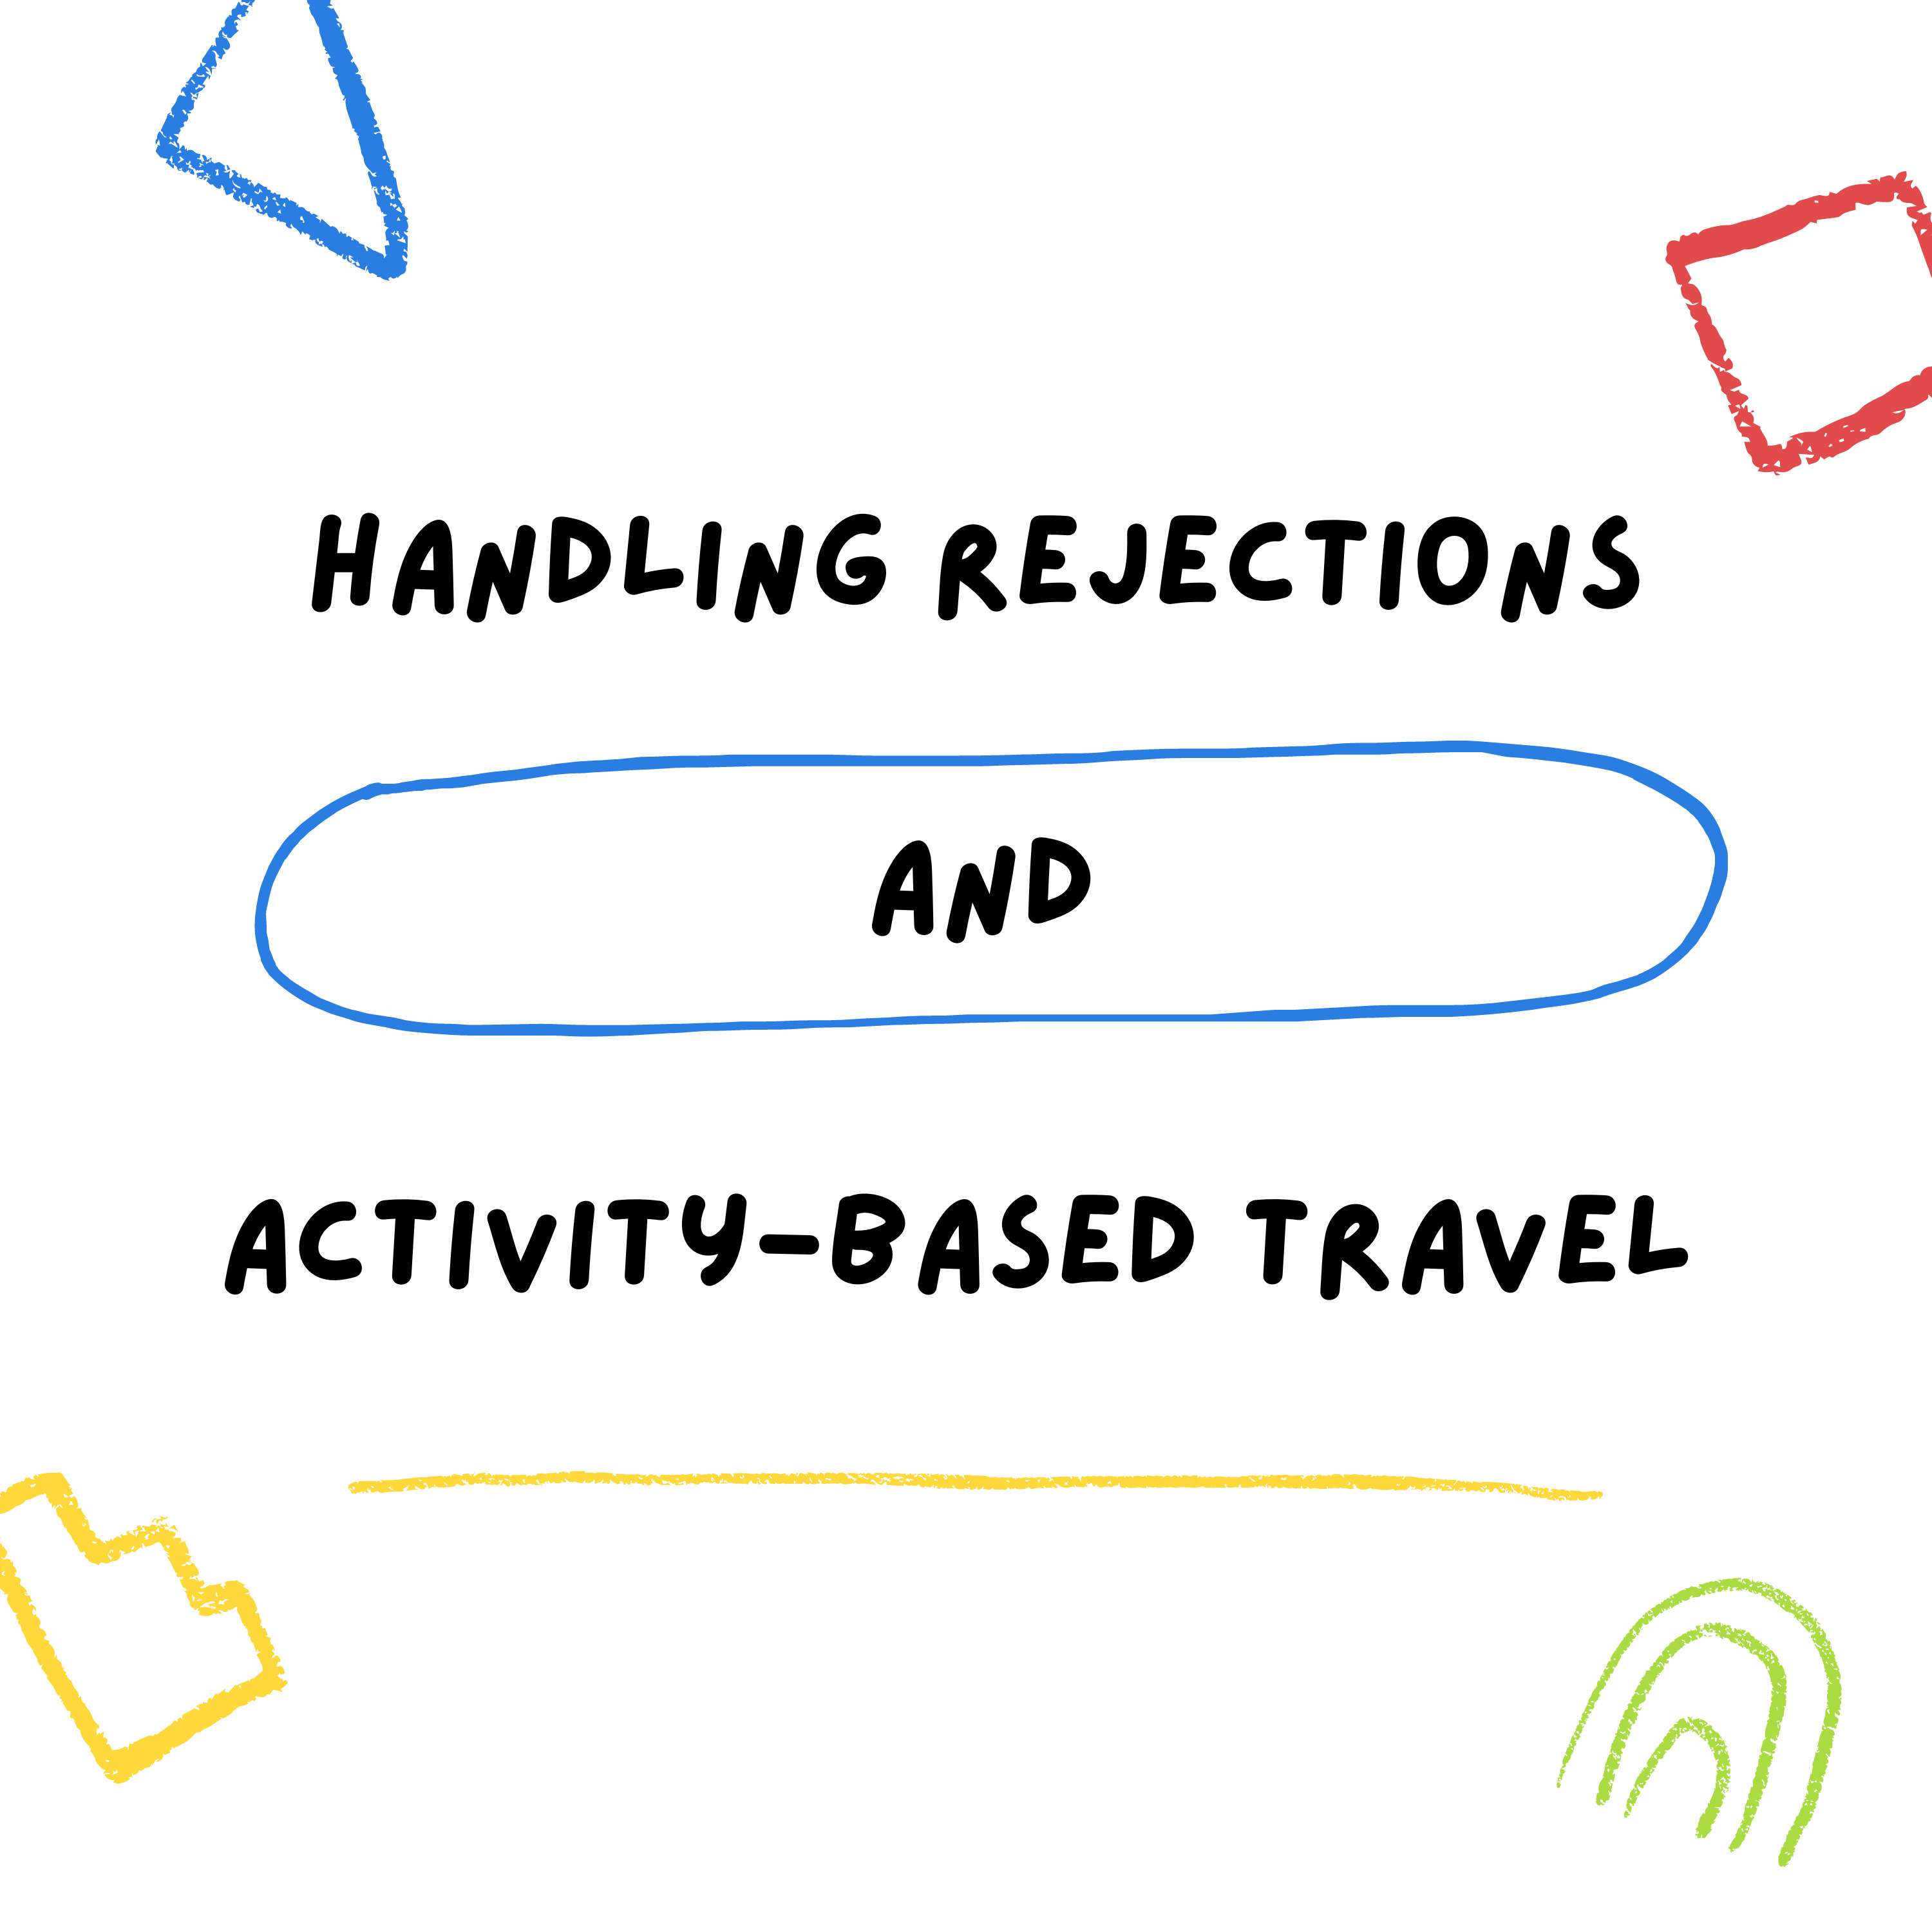 Handling Rejections and Activity-Based Travel